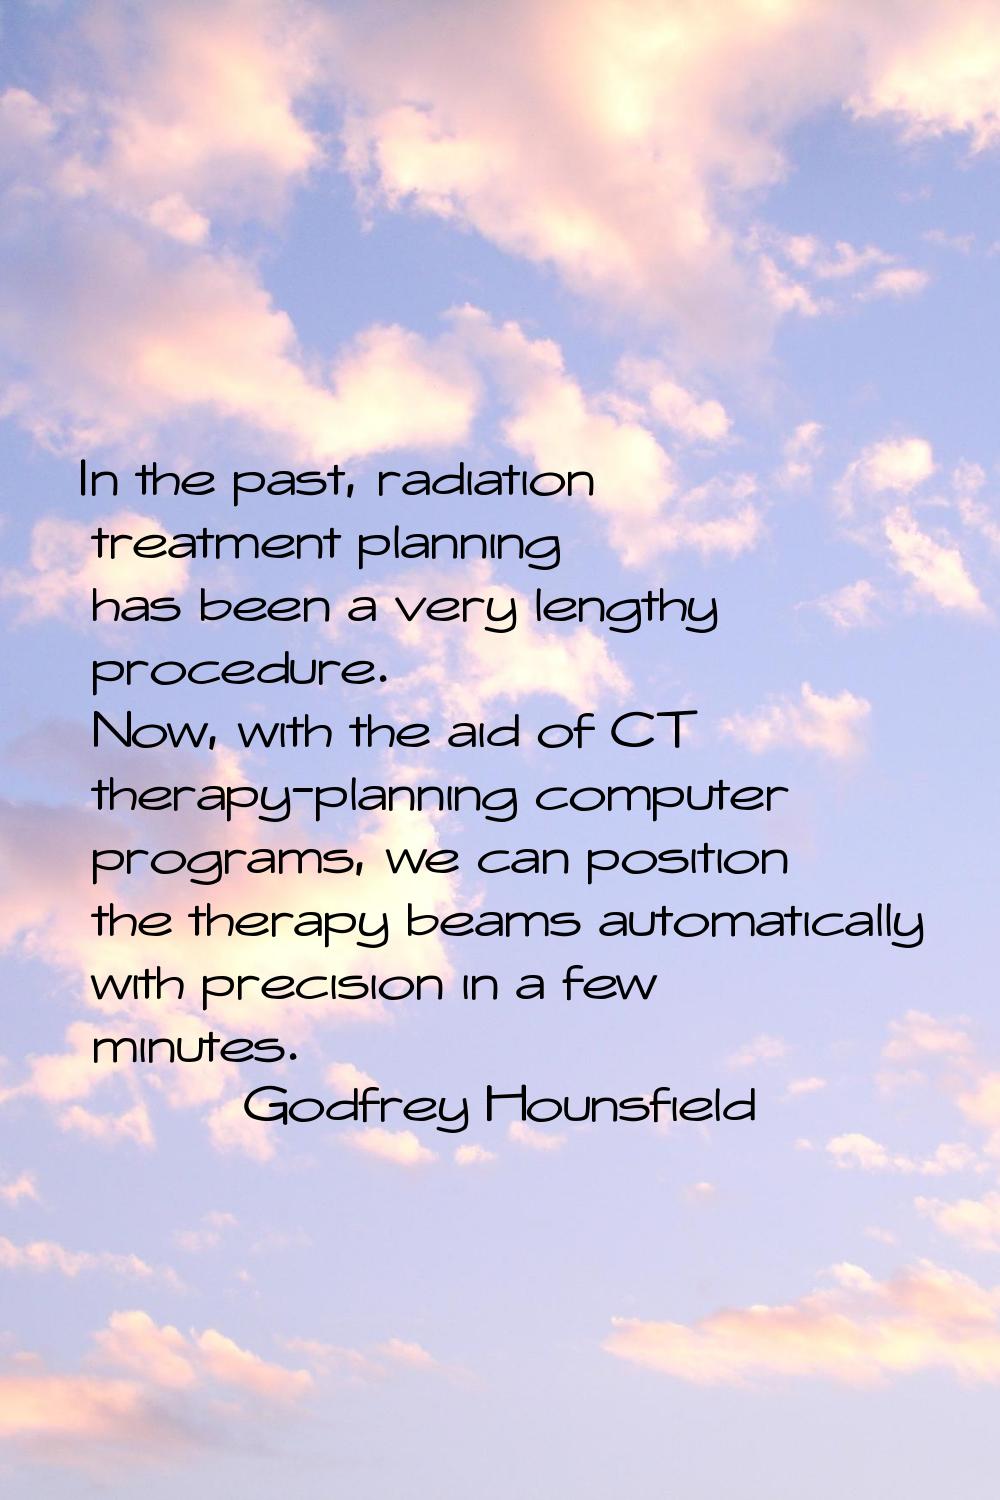 In the past, radiation treatment planning has been a very lengthy procedure. Now, with the aid of C